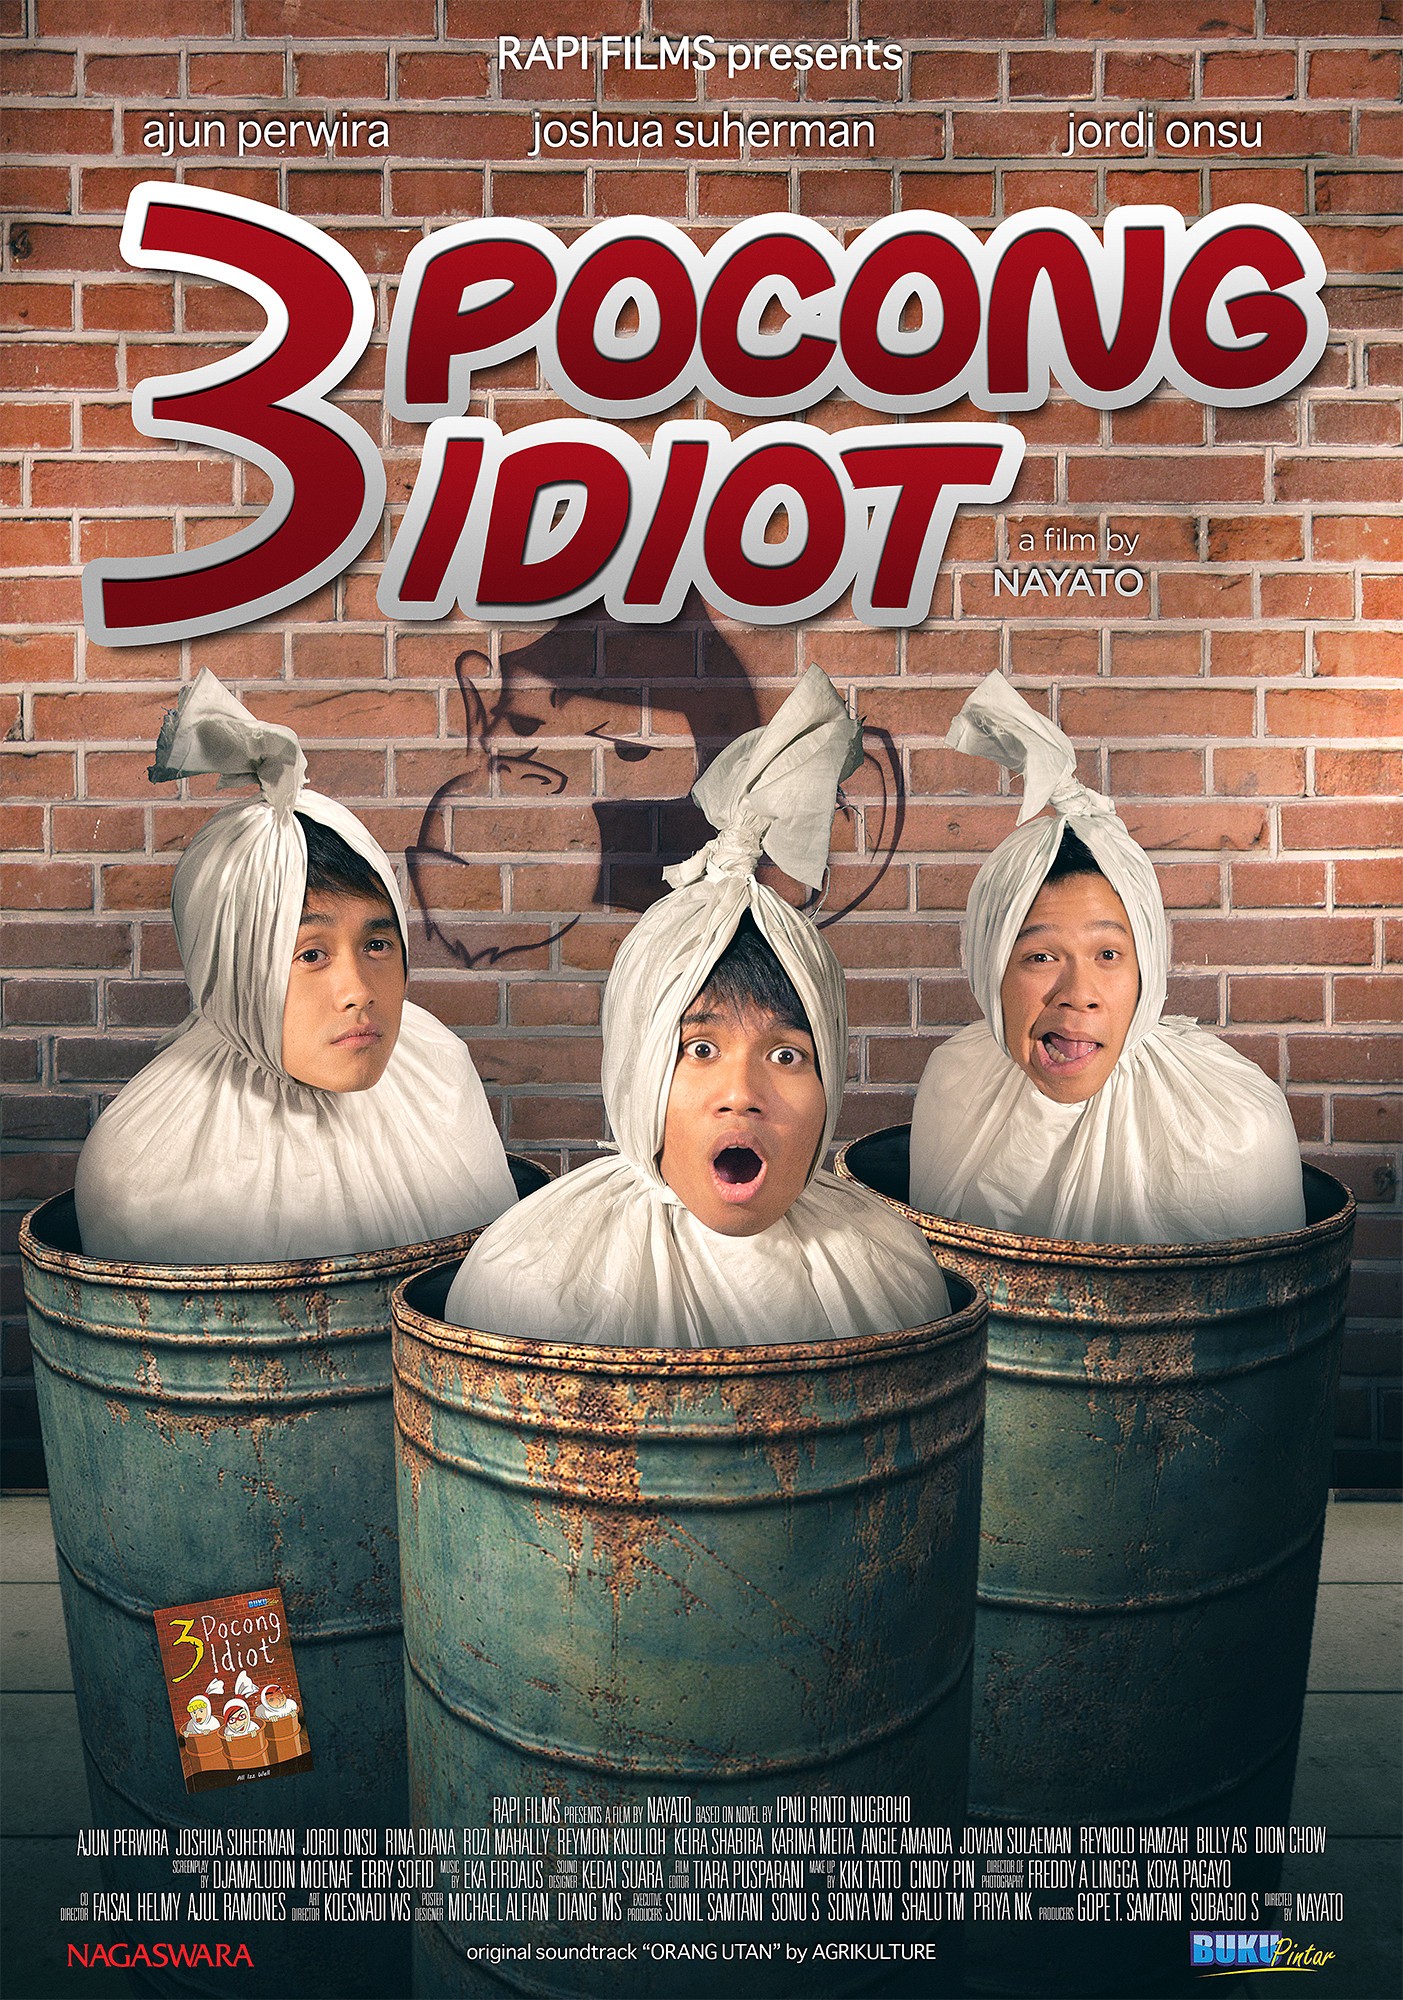 Mega Sized Movie Poster Image for 3 pocong idiot (#2 of 2)